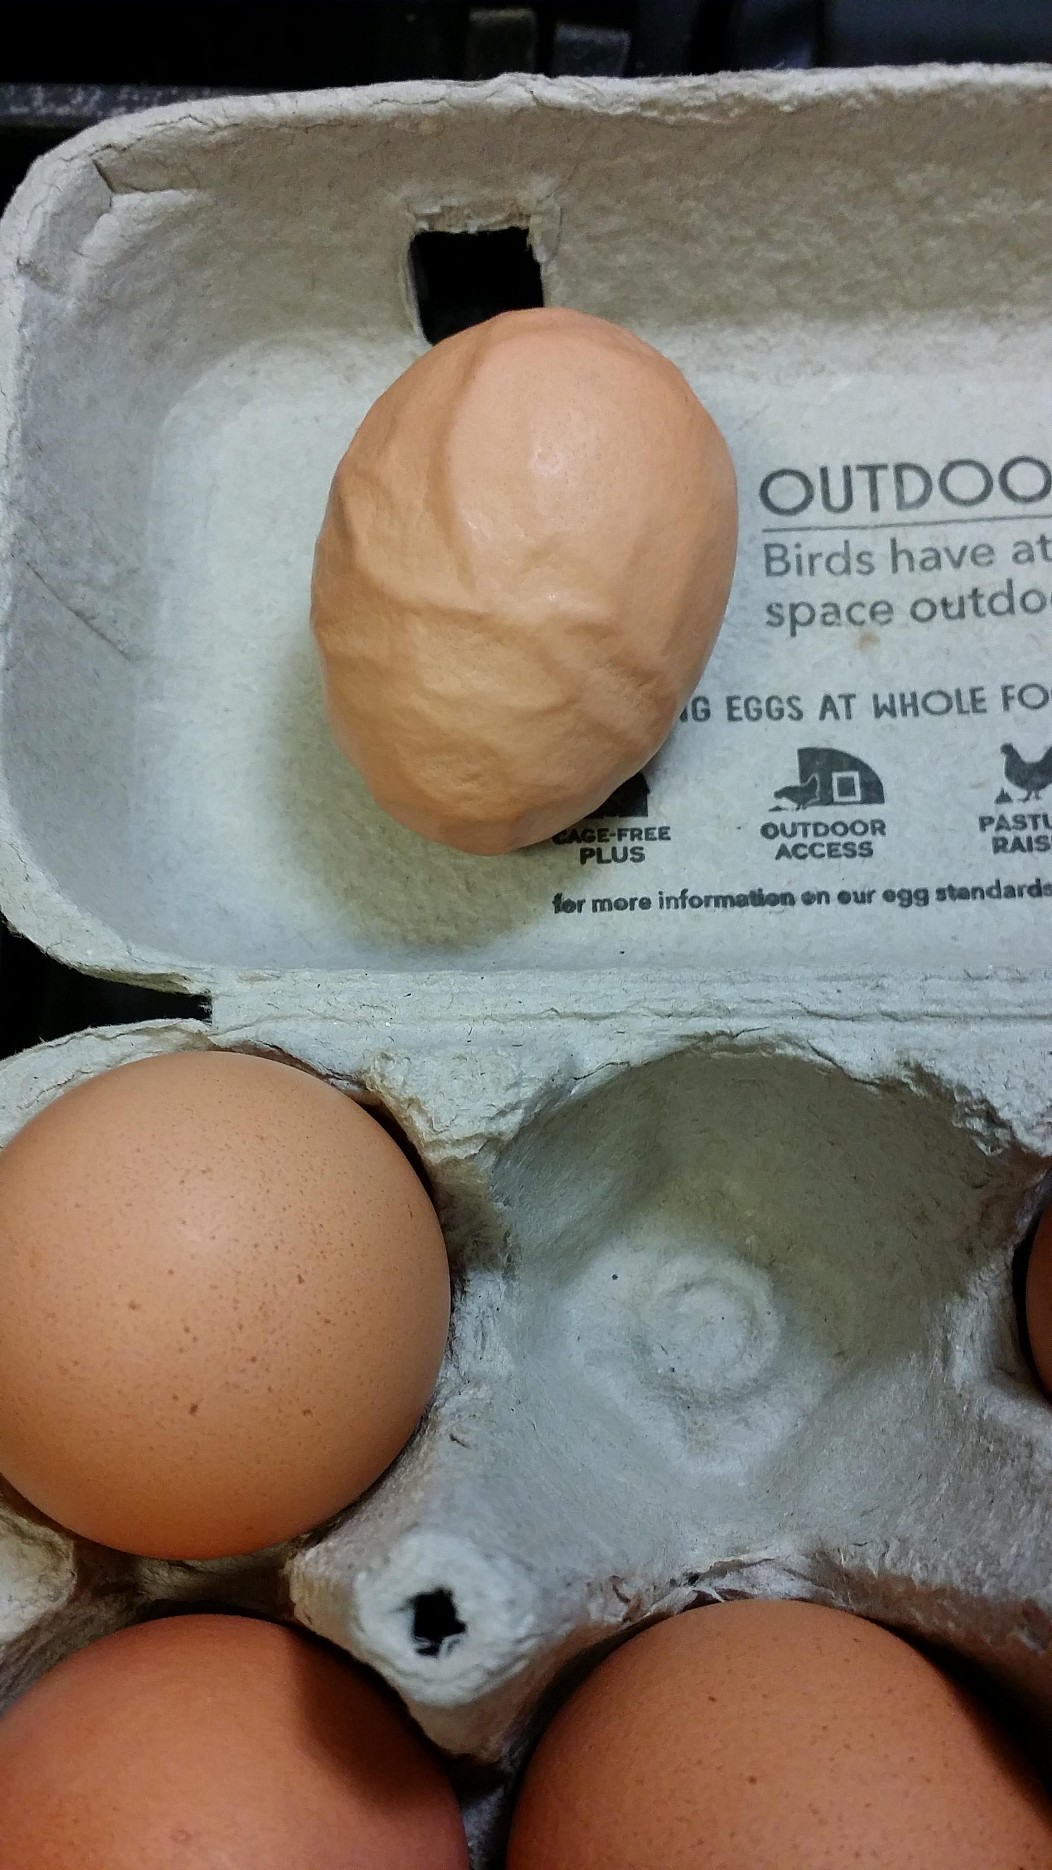 random egg - Outdoo Birds have at space outdo .B Eggs At Whole To 0 Ondon mere inforneu dd